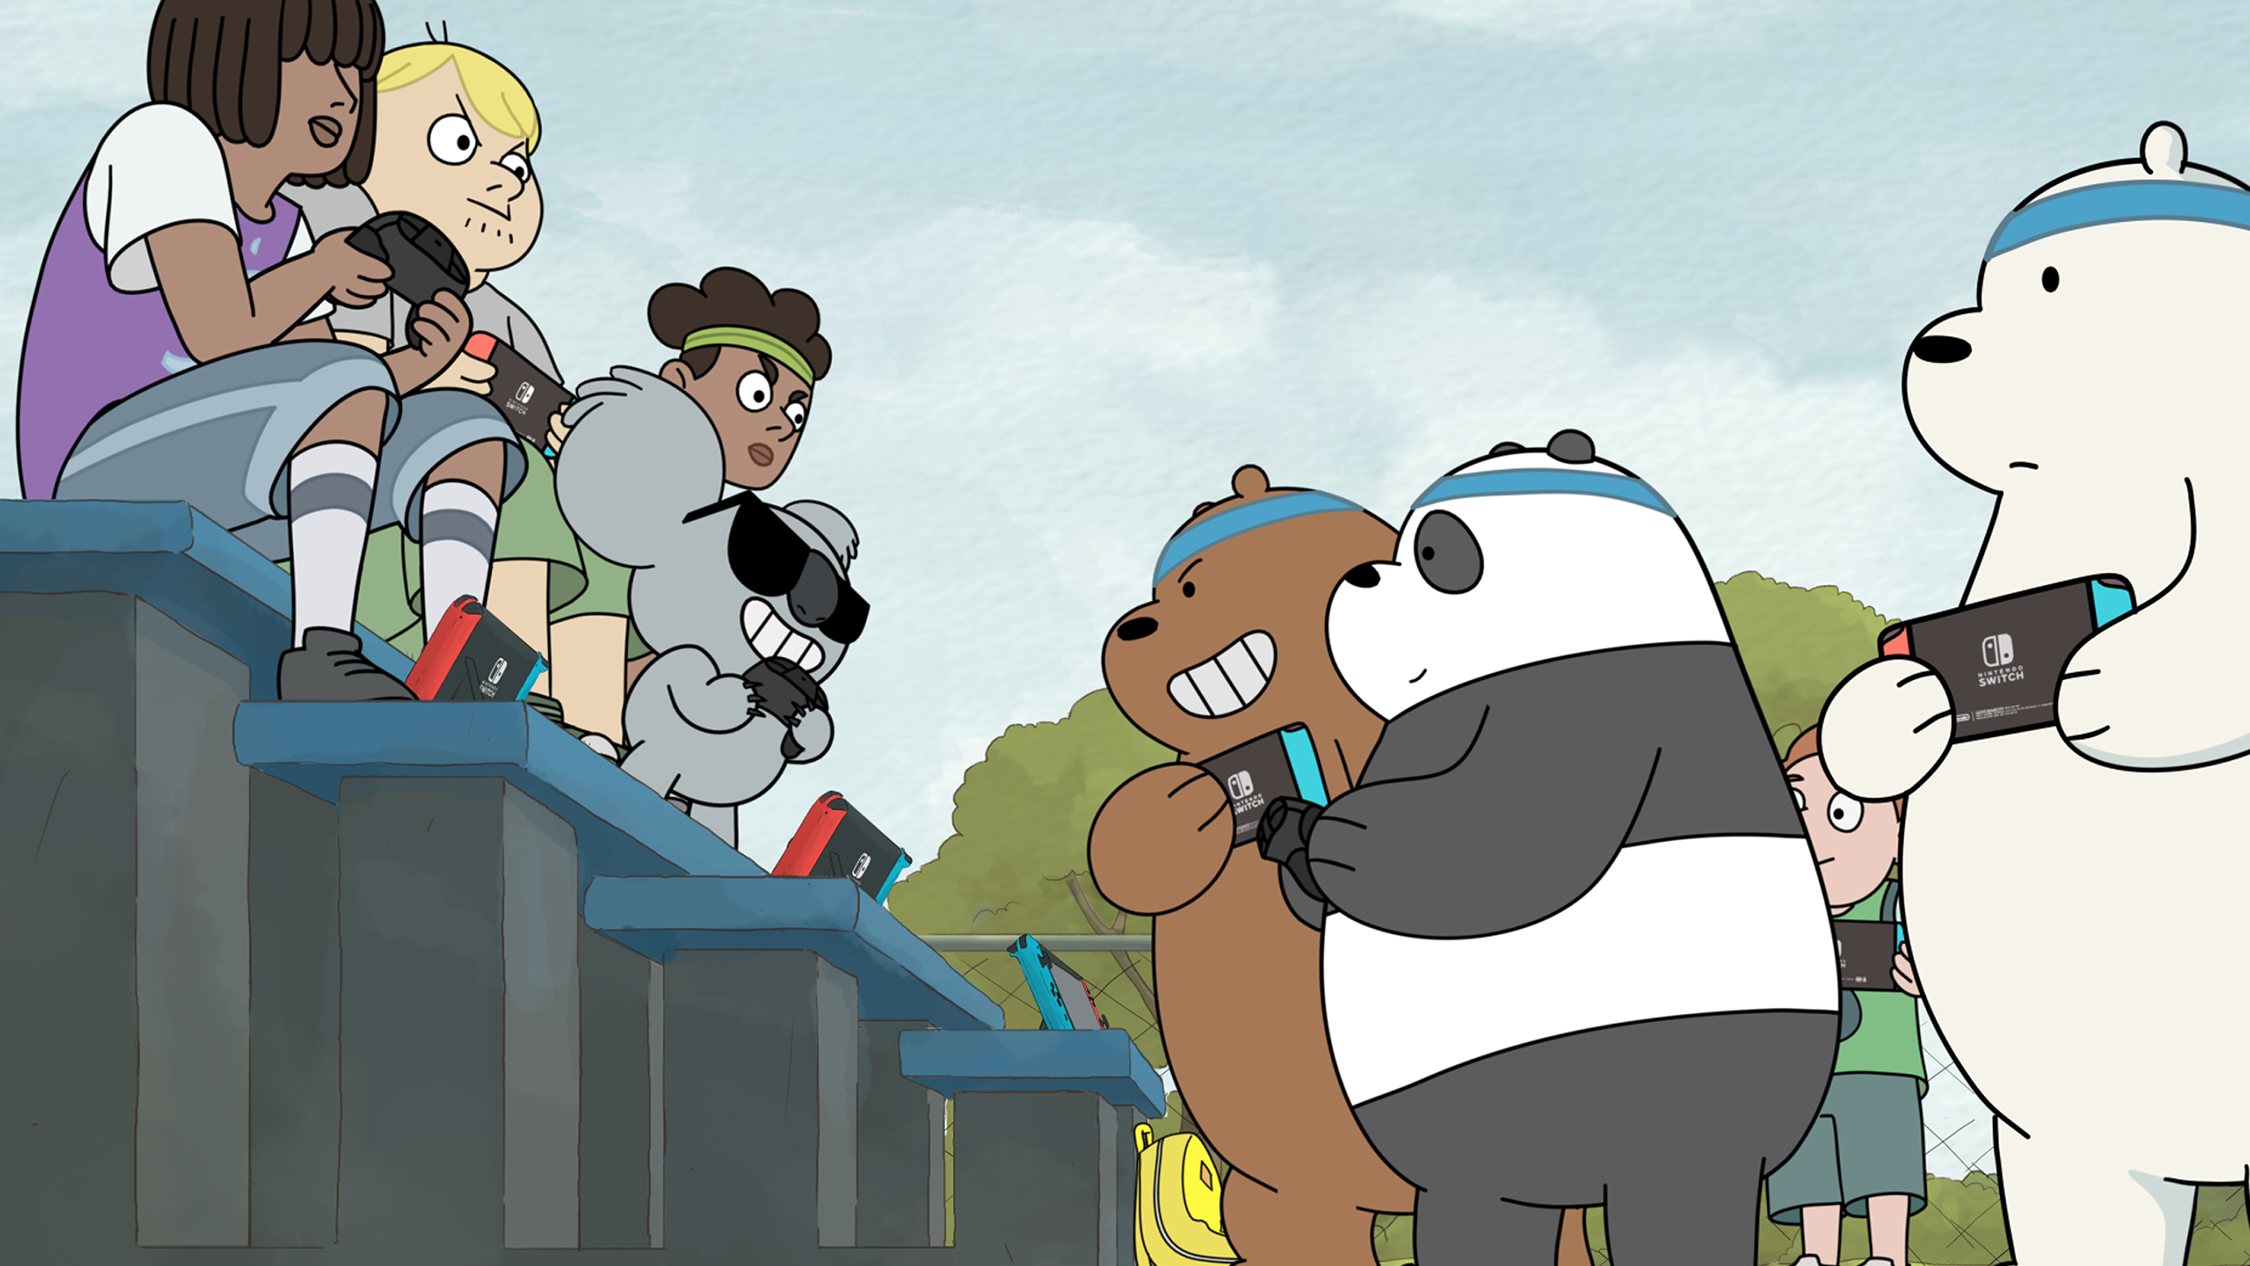 Nintendo Switch and We Bare Bears still from the complete short, Battle for Turf